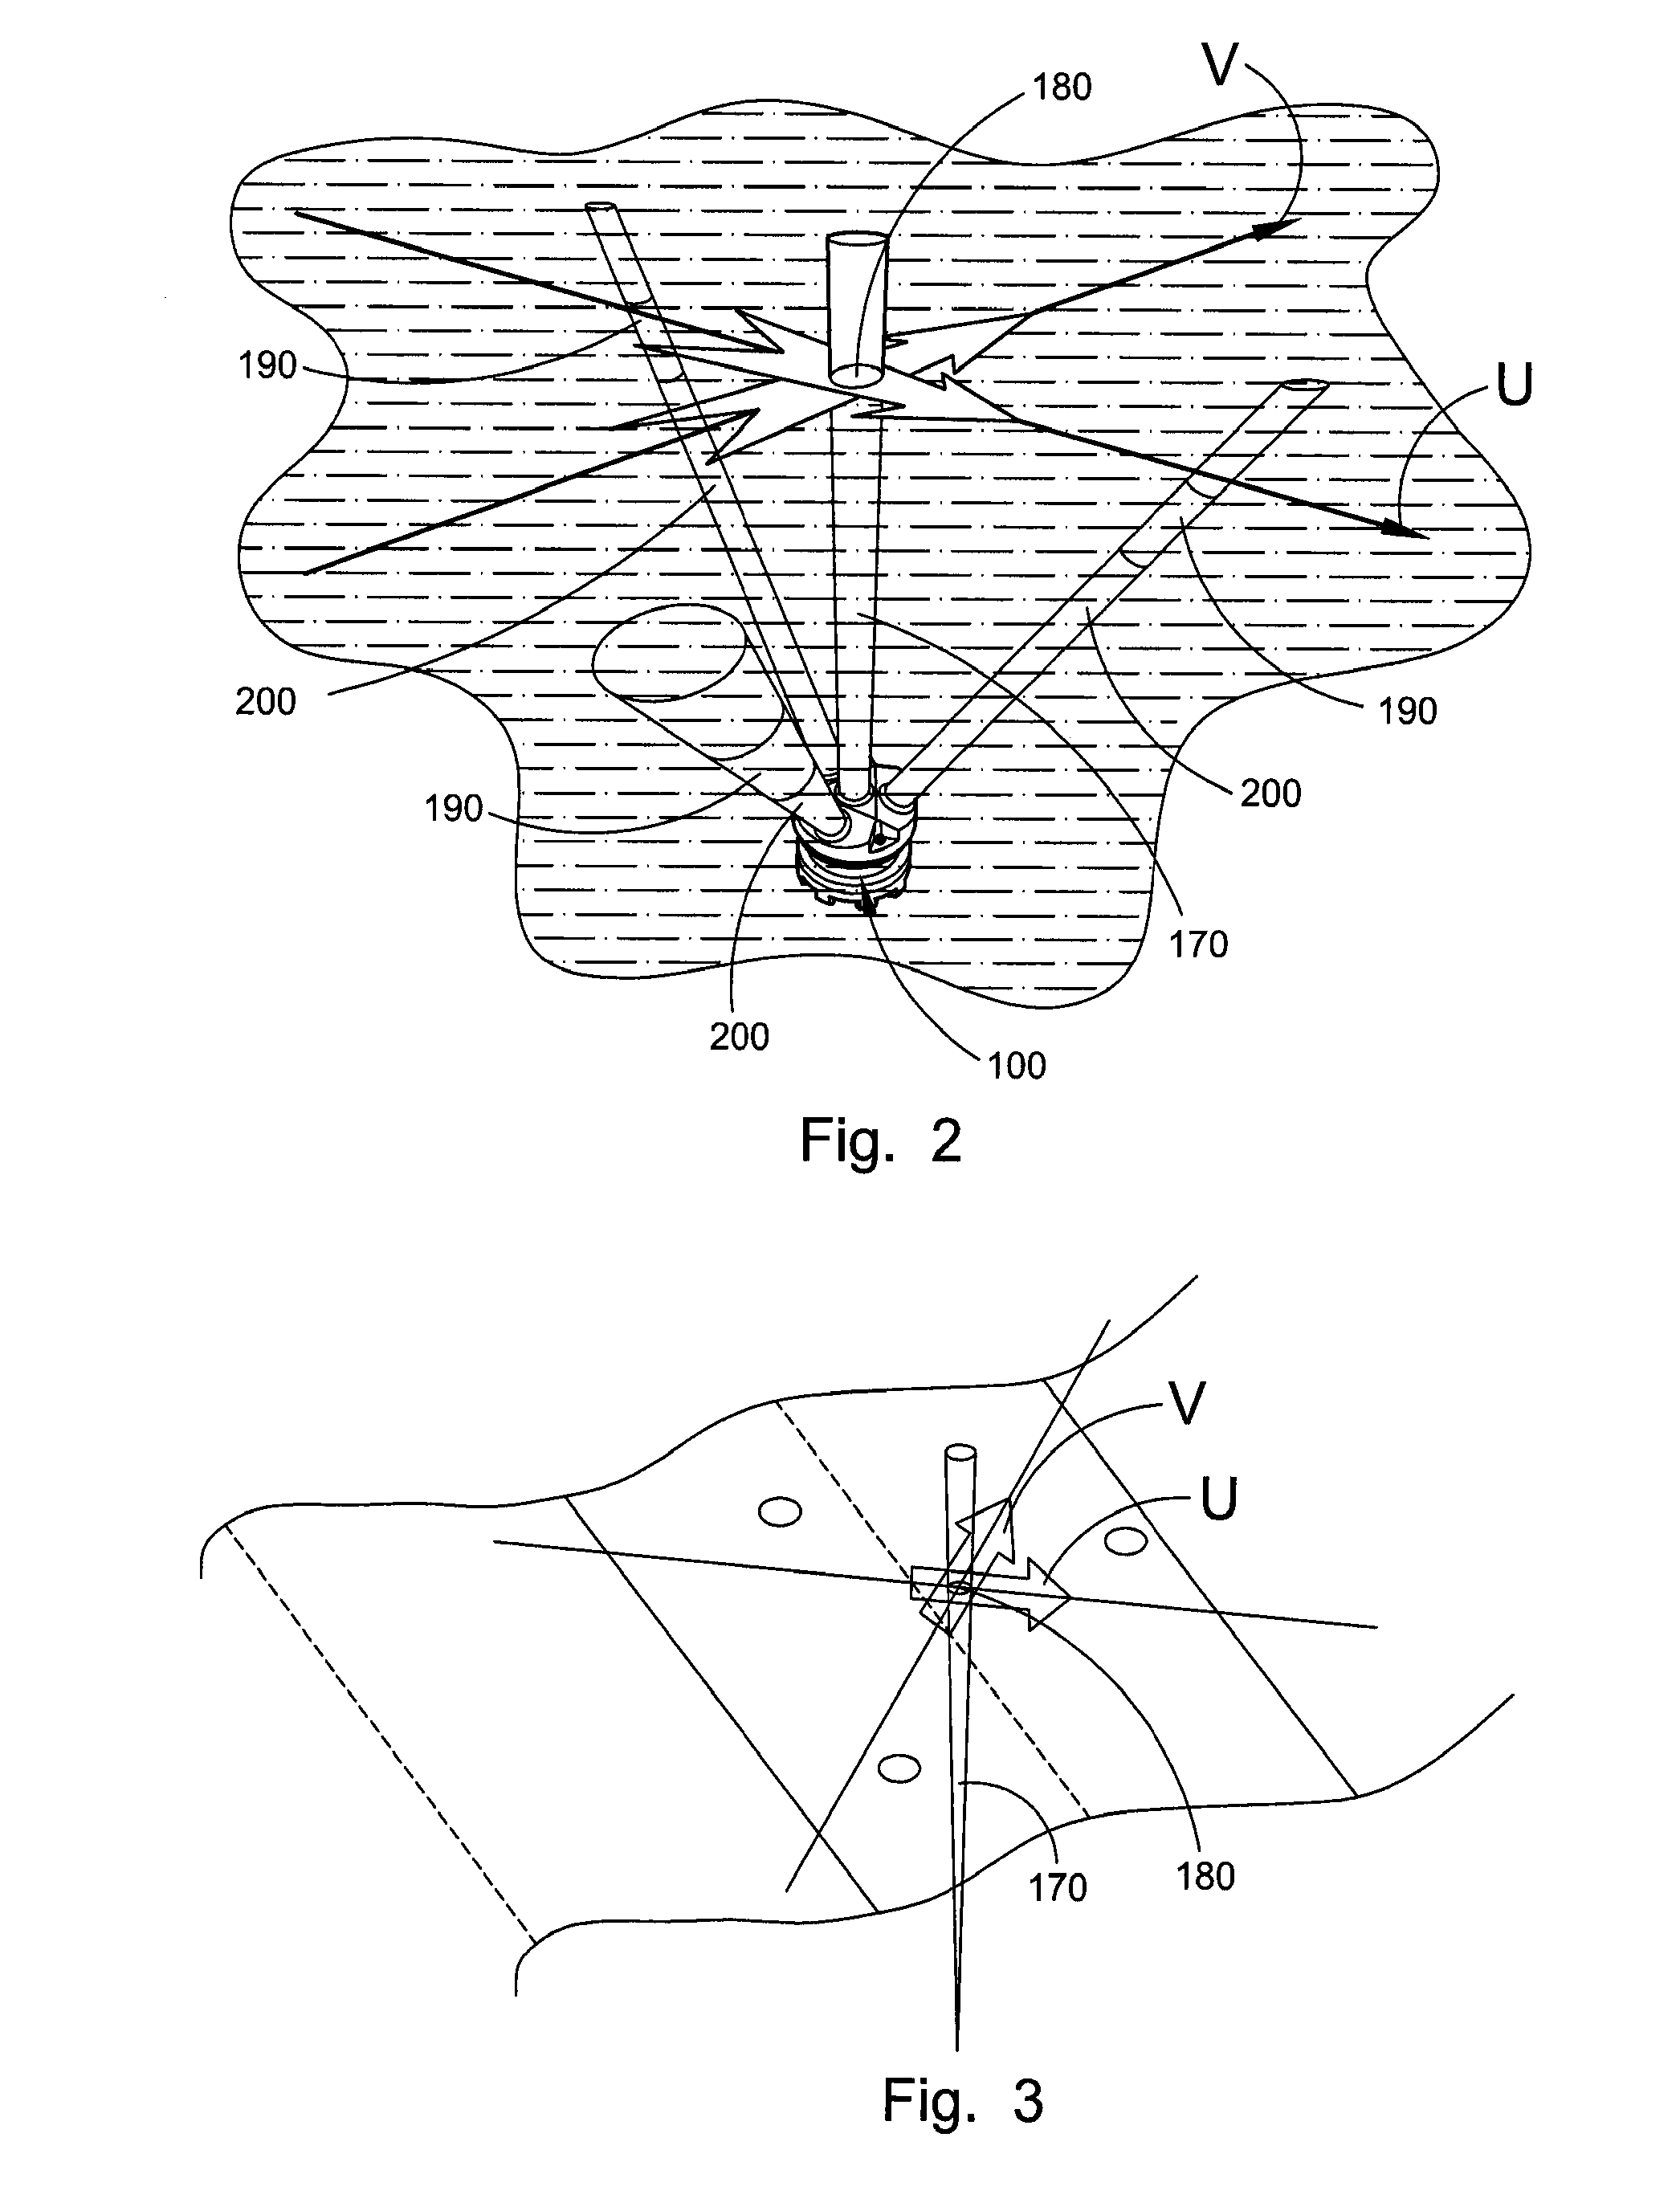 System and Method for Determining Directional and Non-directional Fluid Wave and Current Measurements